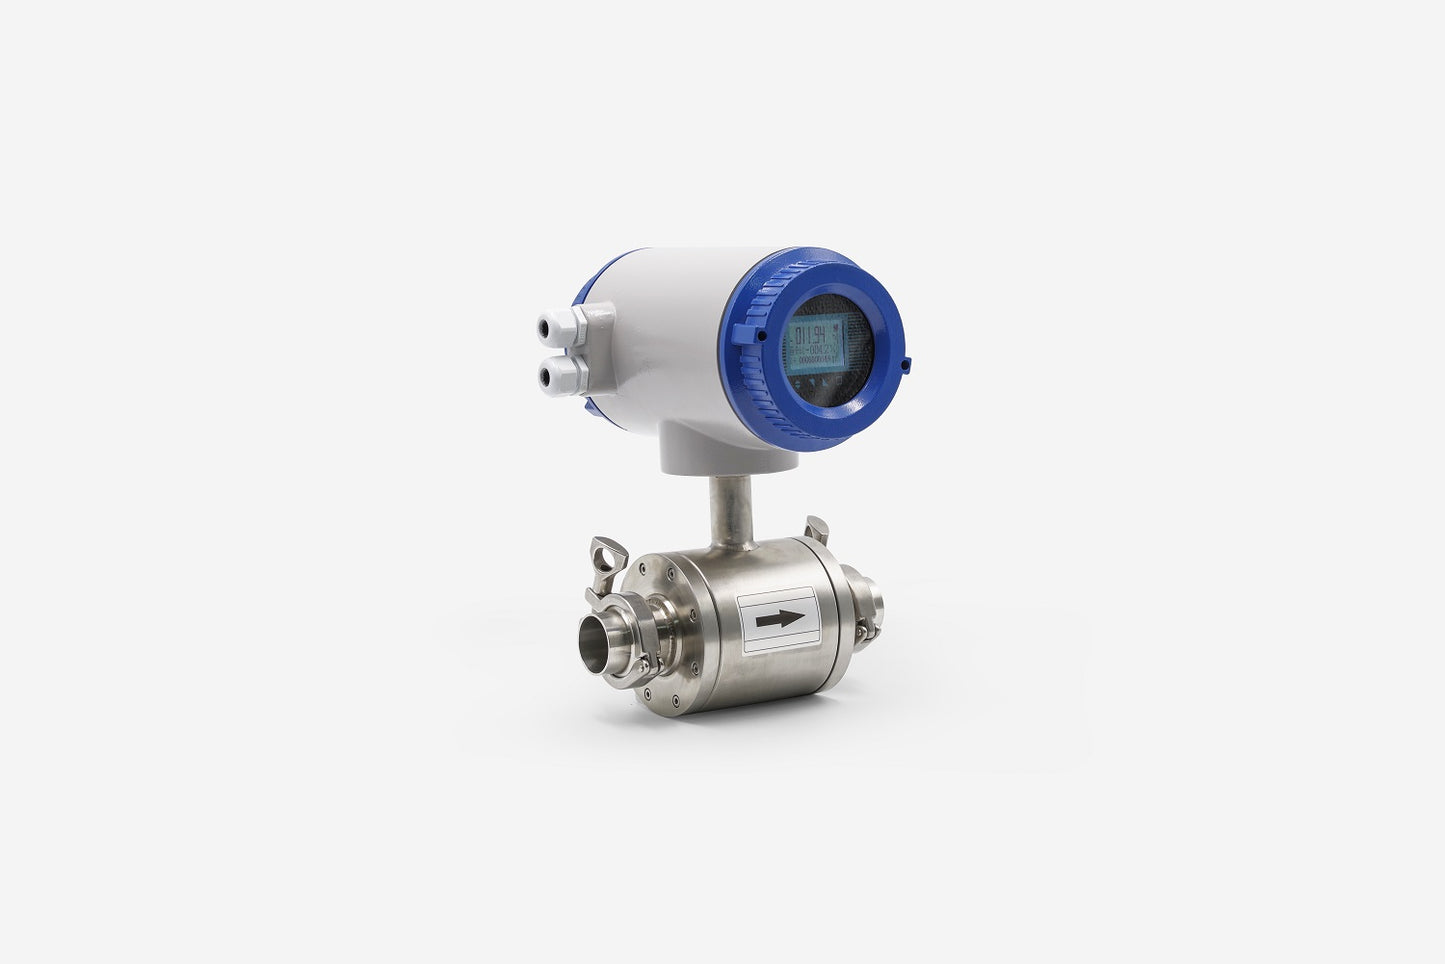 Aoxin LDQ-98A Clamp Electromagnetic Flowmeter Price